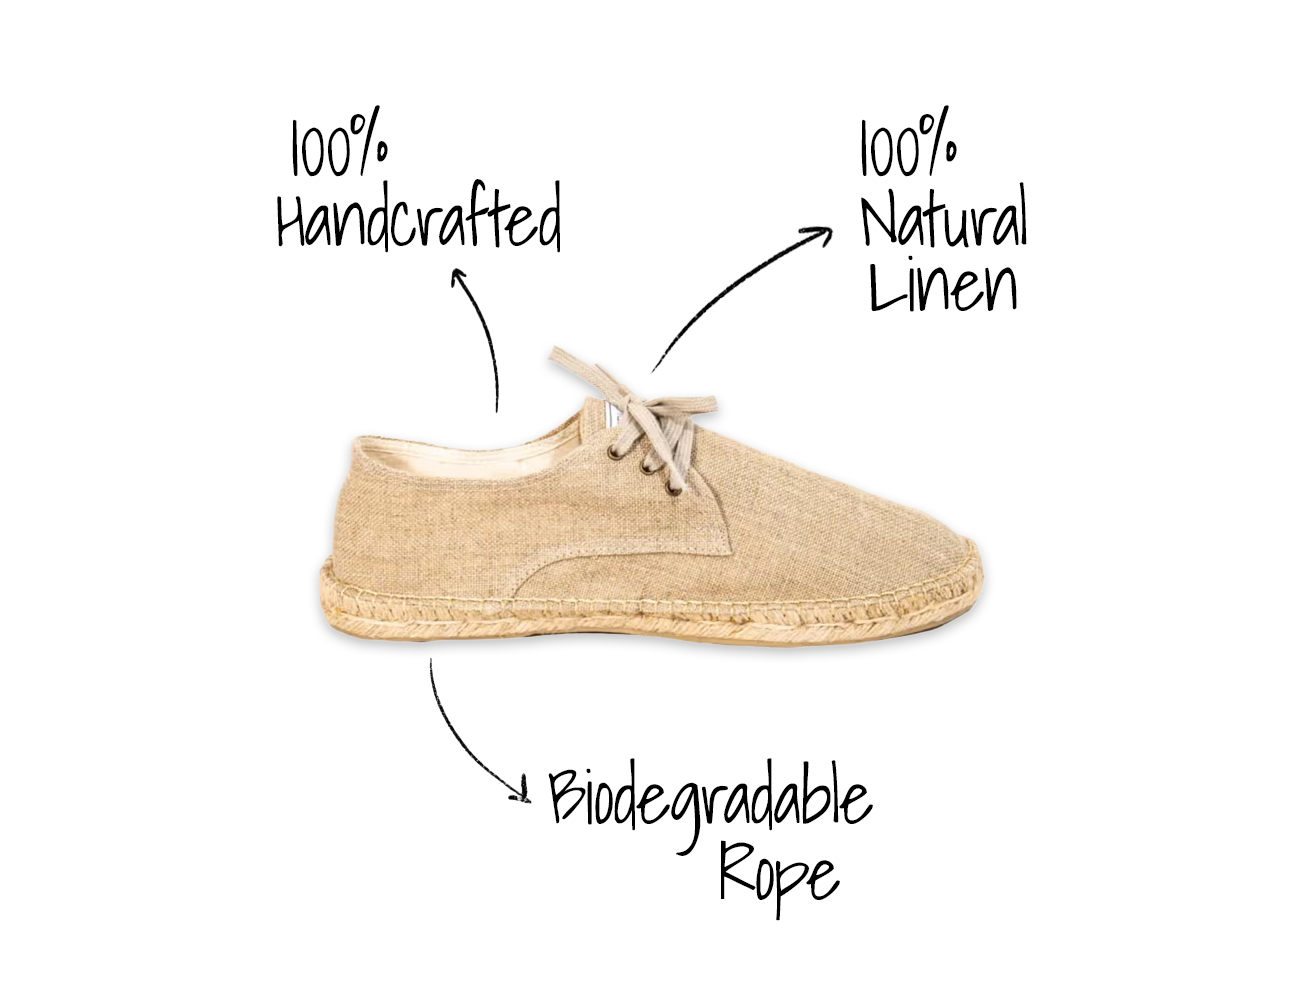 strets shoes features - 100% handcrafted,100% natural linen, biodegradable rope